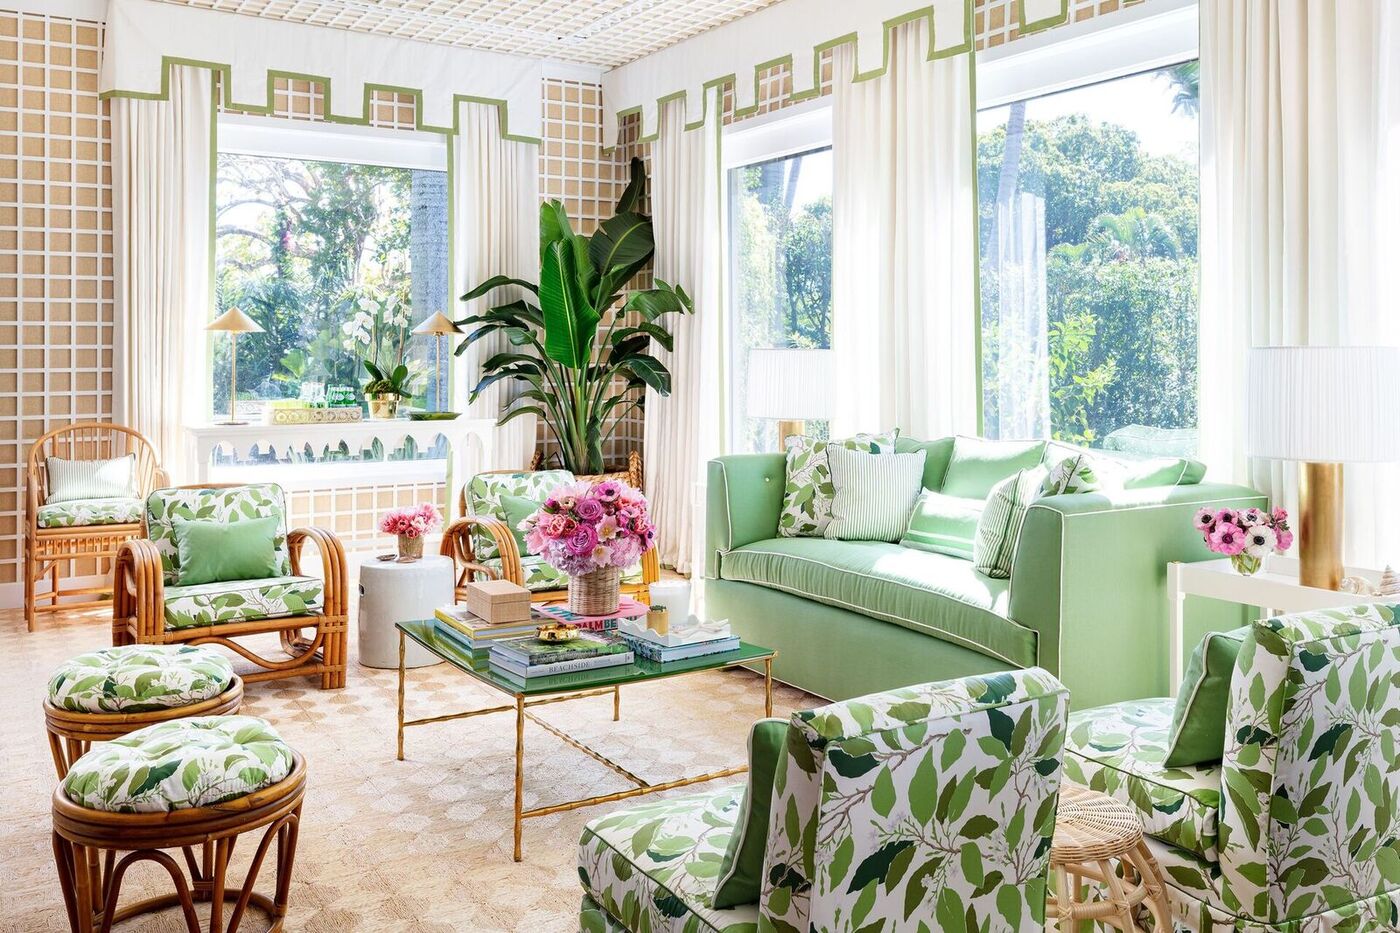 Kips Bay Decorator Show House Palm Beach 2022: The Best Rooms